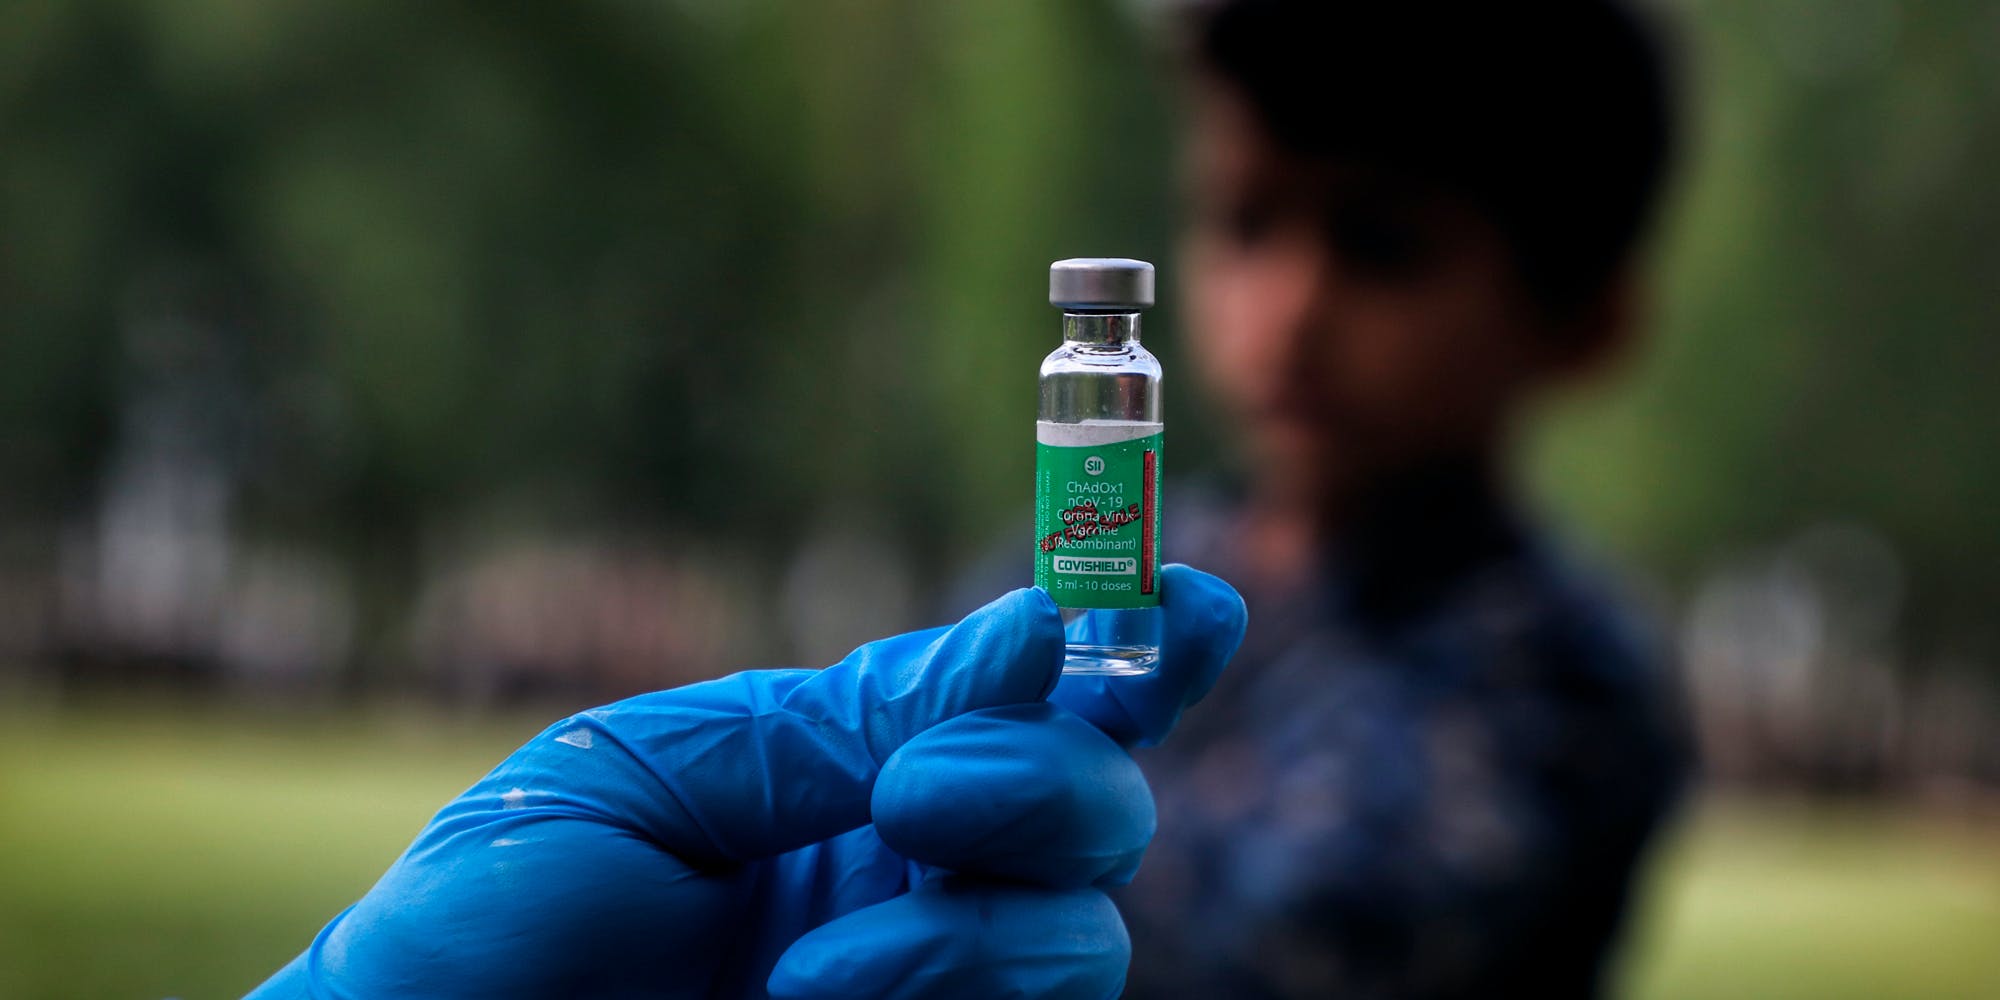 A Health Worker holds a Used Vial of COVISHIELD Coronavirus Vaccine at a Vaccination Center in Sopore, District Baramulla, Jammu and Kashmir, India on 03 May 2021. Serum Institute of India CEO Aadar Poonawalla has said that the production of COVID-19 vaccine Covishield is in full swing in Pune and he will review the operations once he is back in the country. (Photo by Nasir Kachroo/NurPhoto via AP)